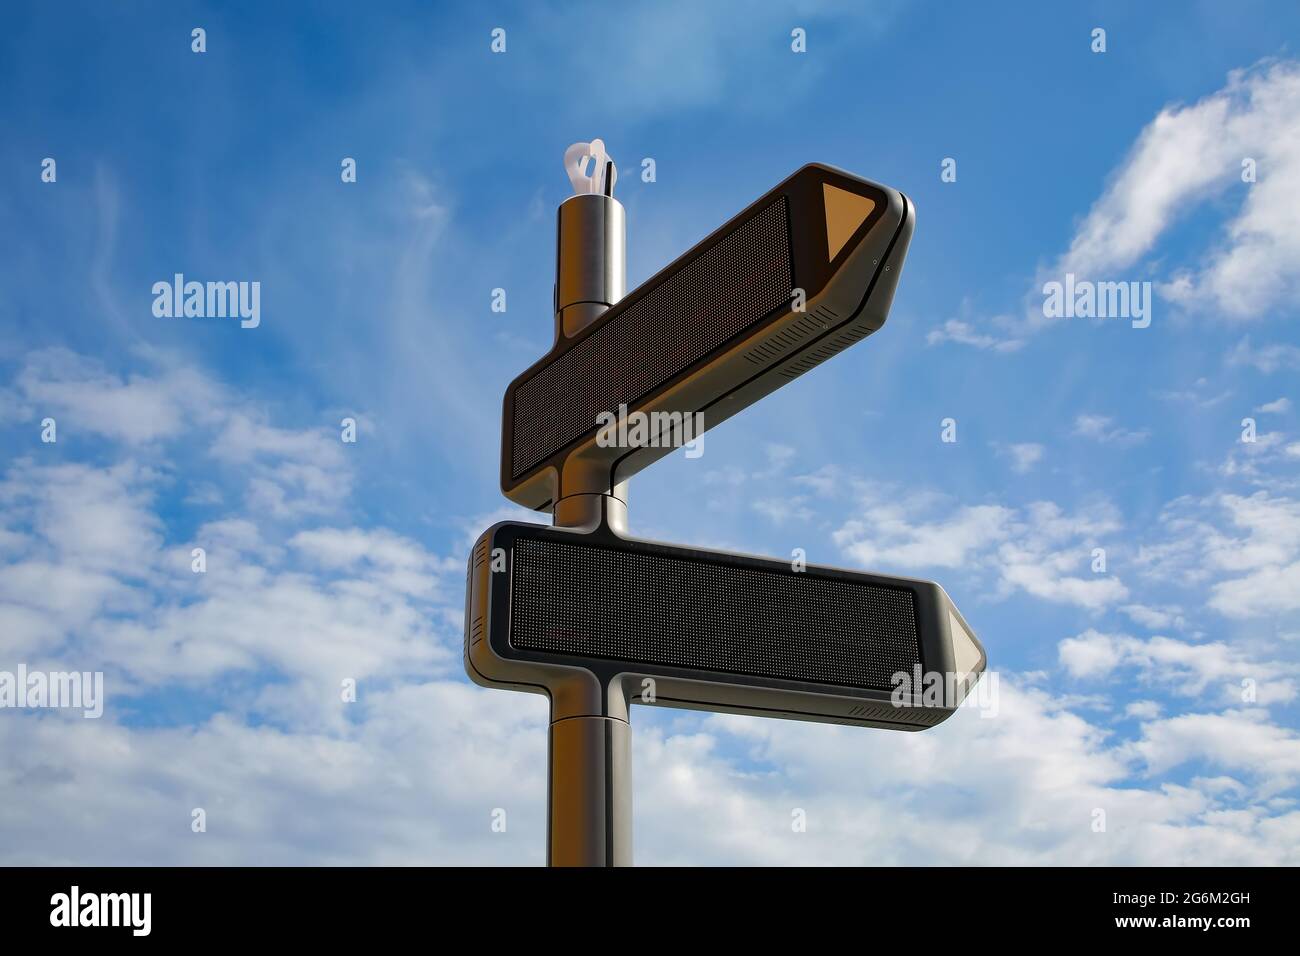 Modern digital sign post. Moves to direction to point and displays information as text and images, Stavanger, Norway. Stock Photo